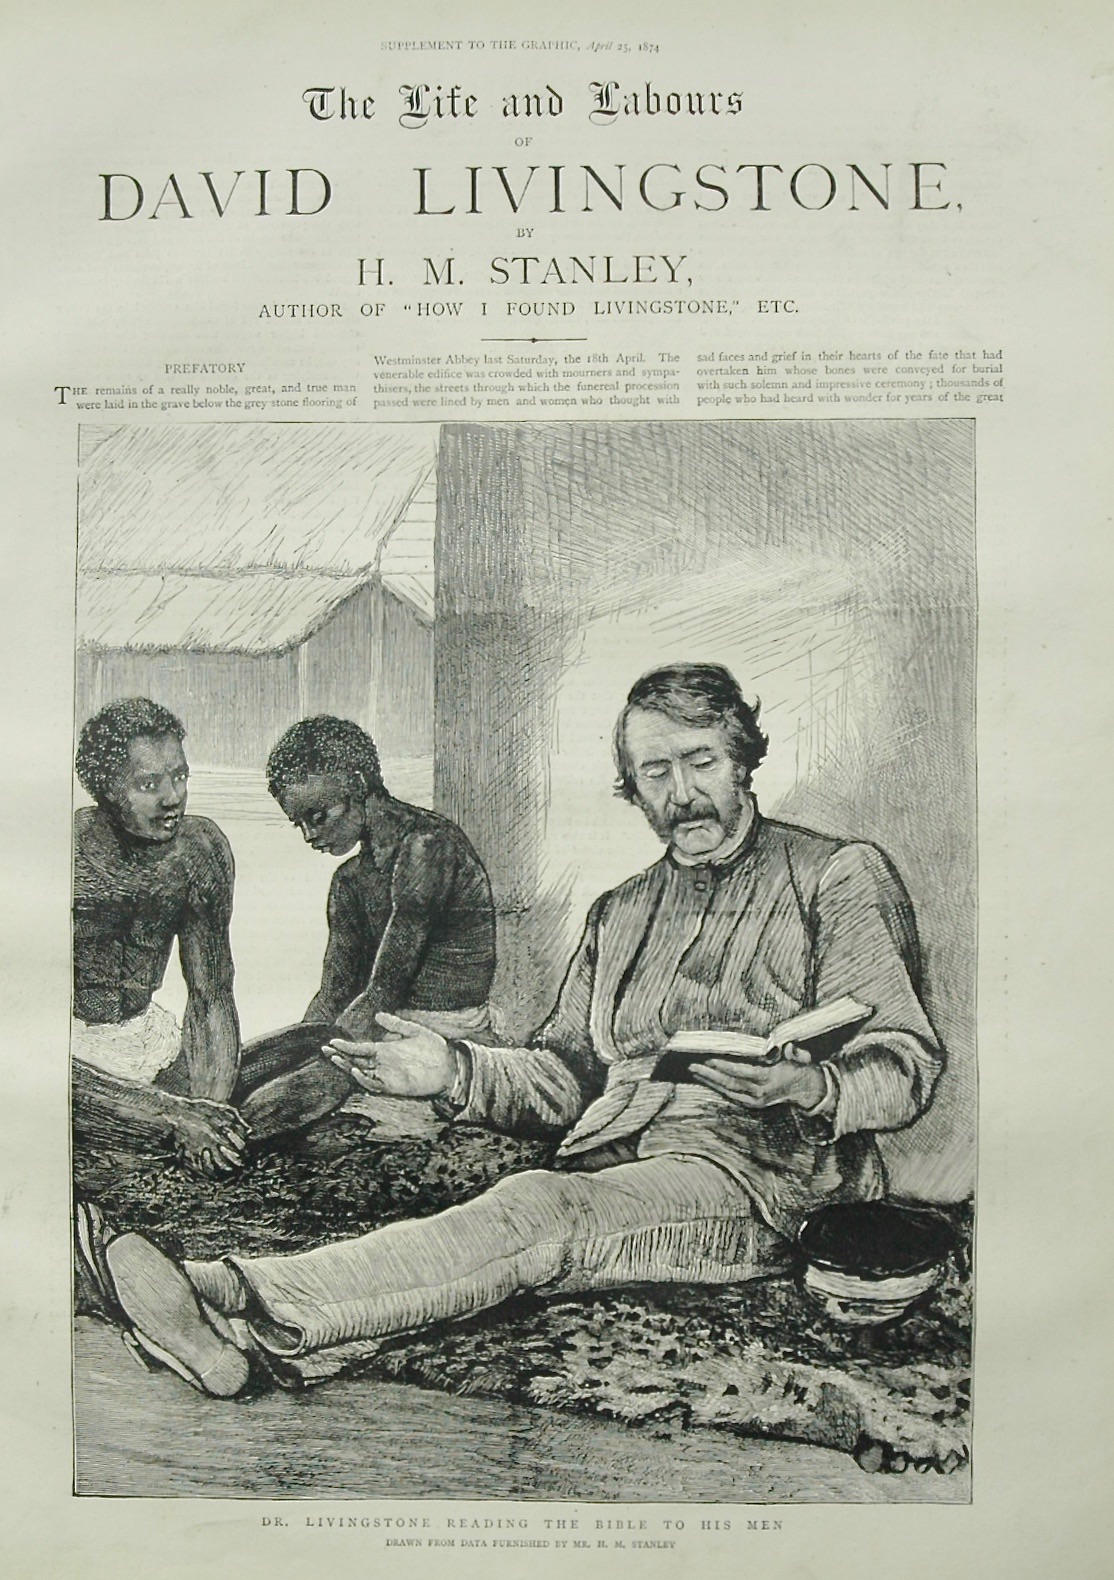 Dr Livingstone reading the Bible to his men - 1874